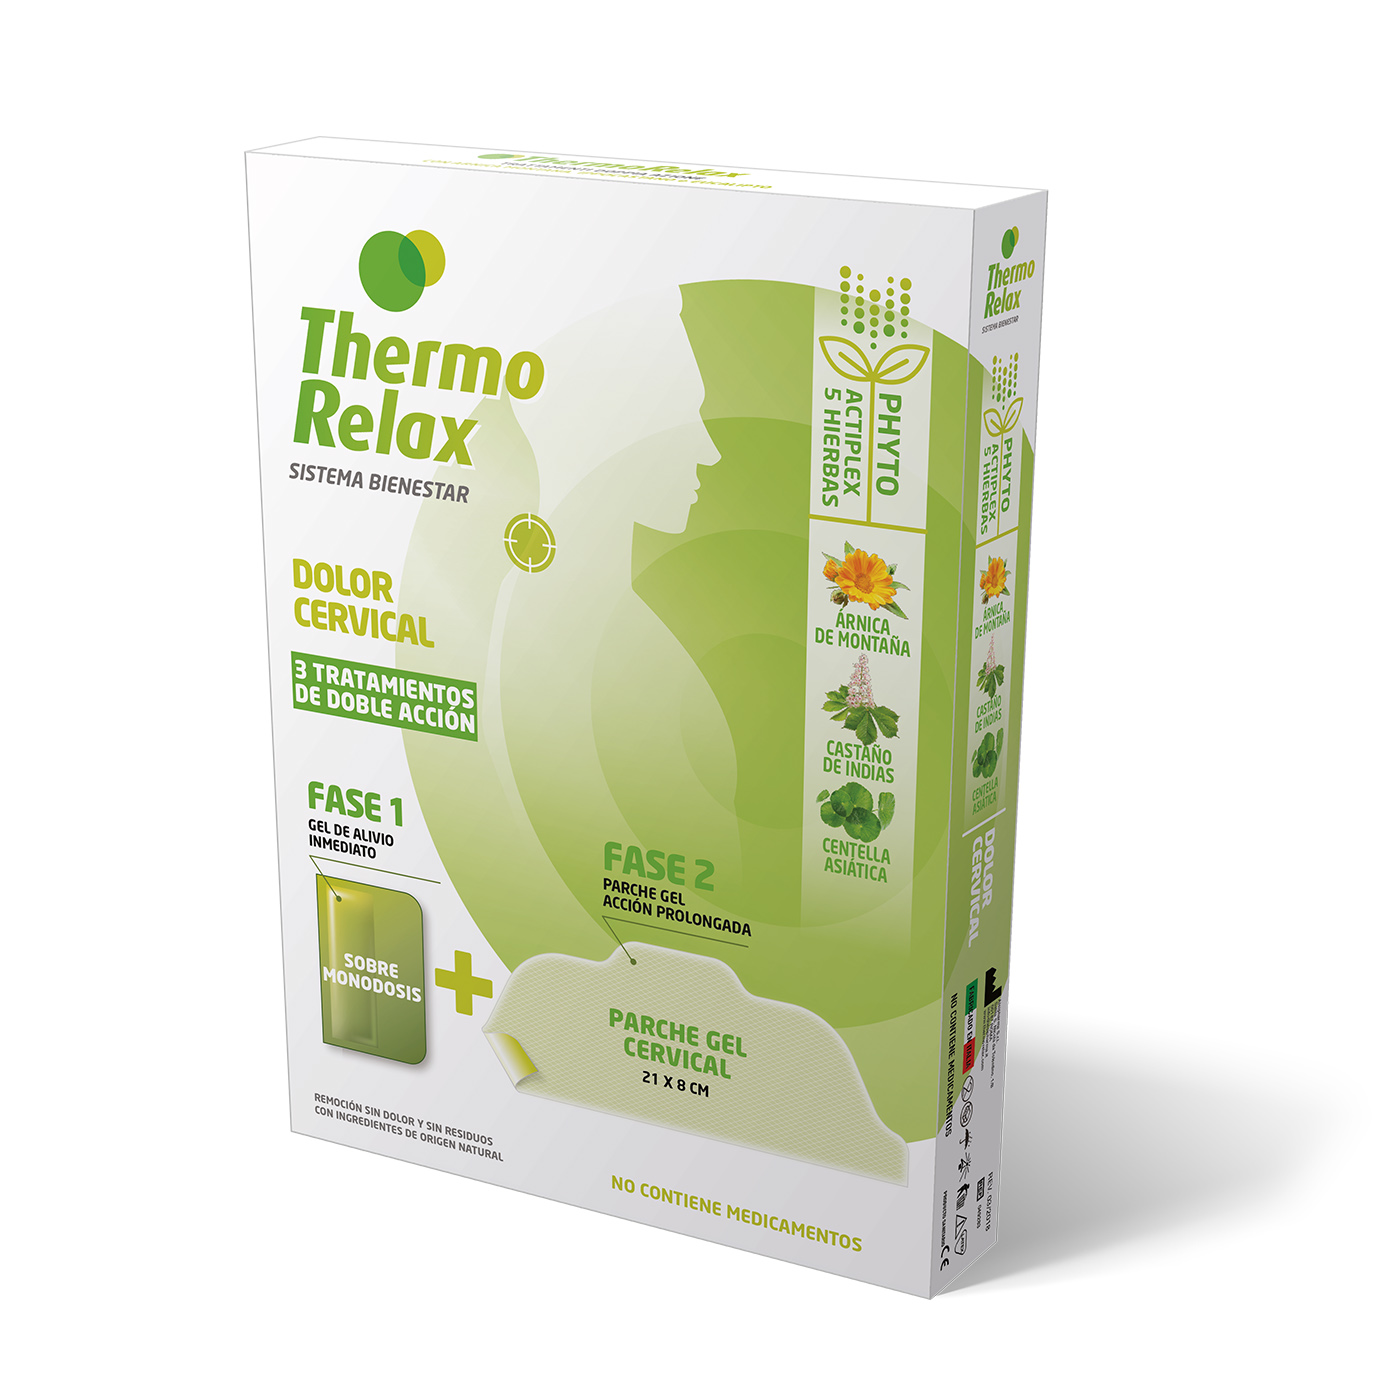 THERMO RELAX DOLORE CERVICAL